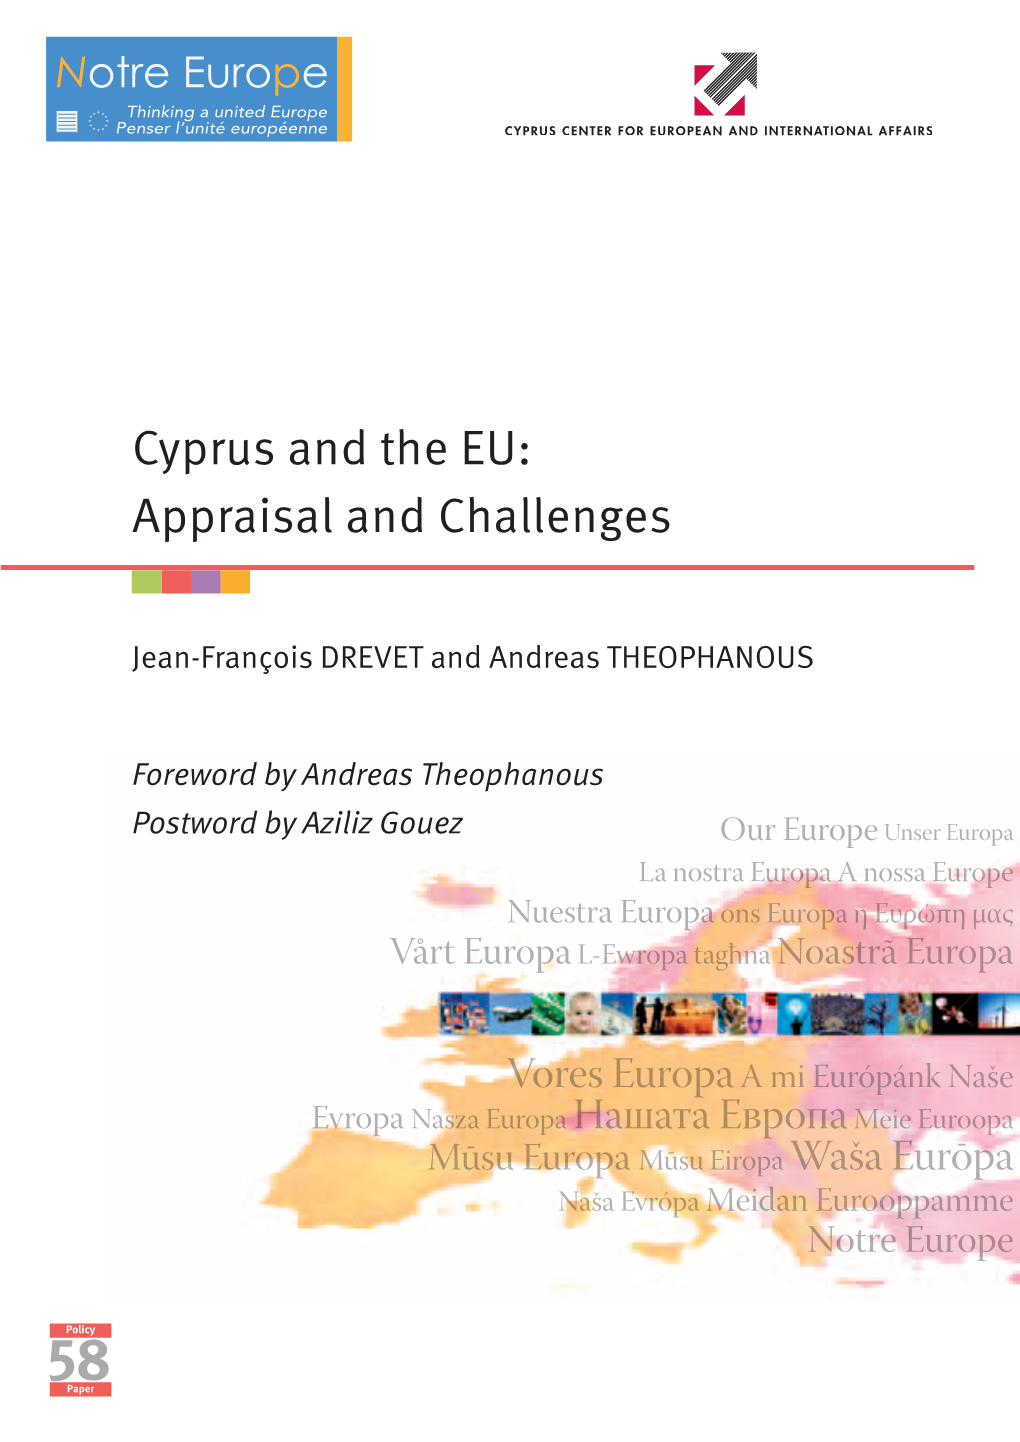 Cyprus and the EU: Appraisal and Challenges